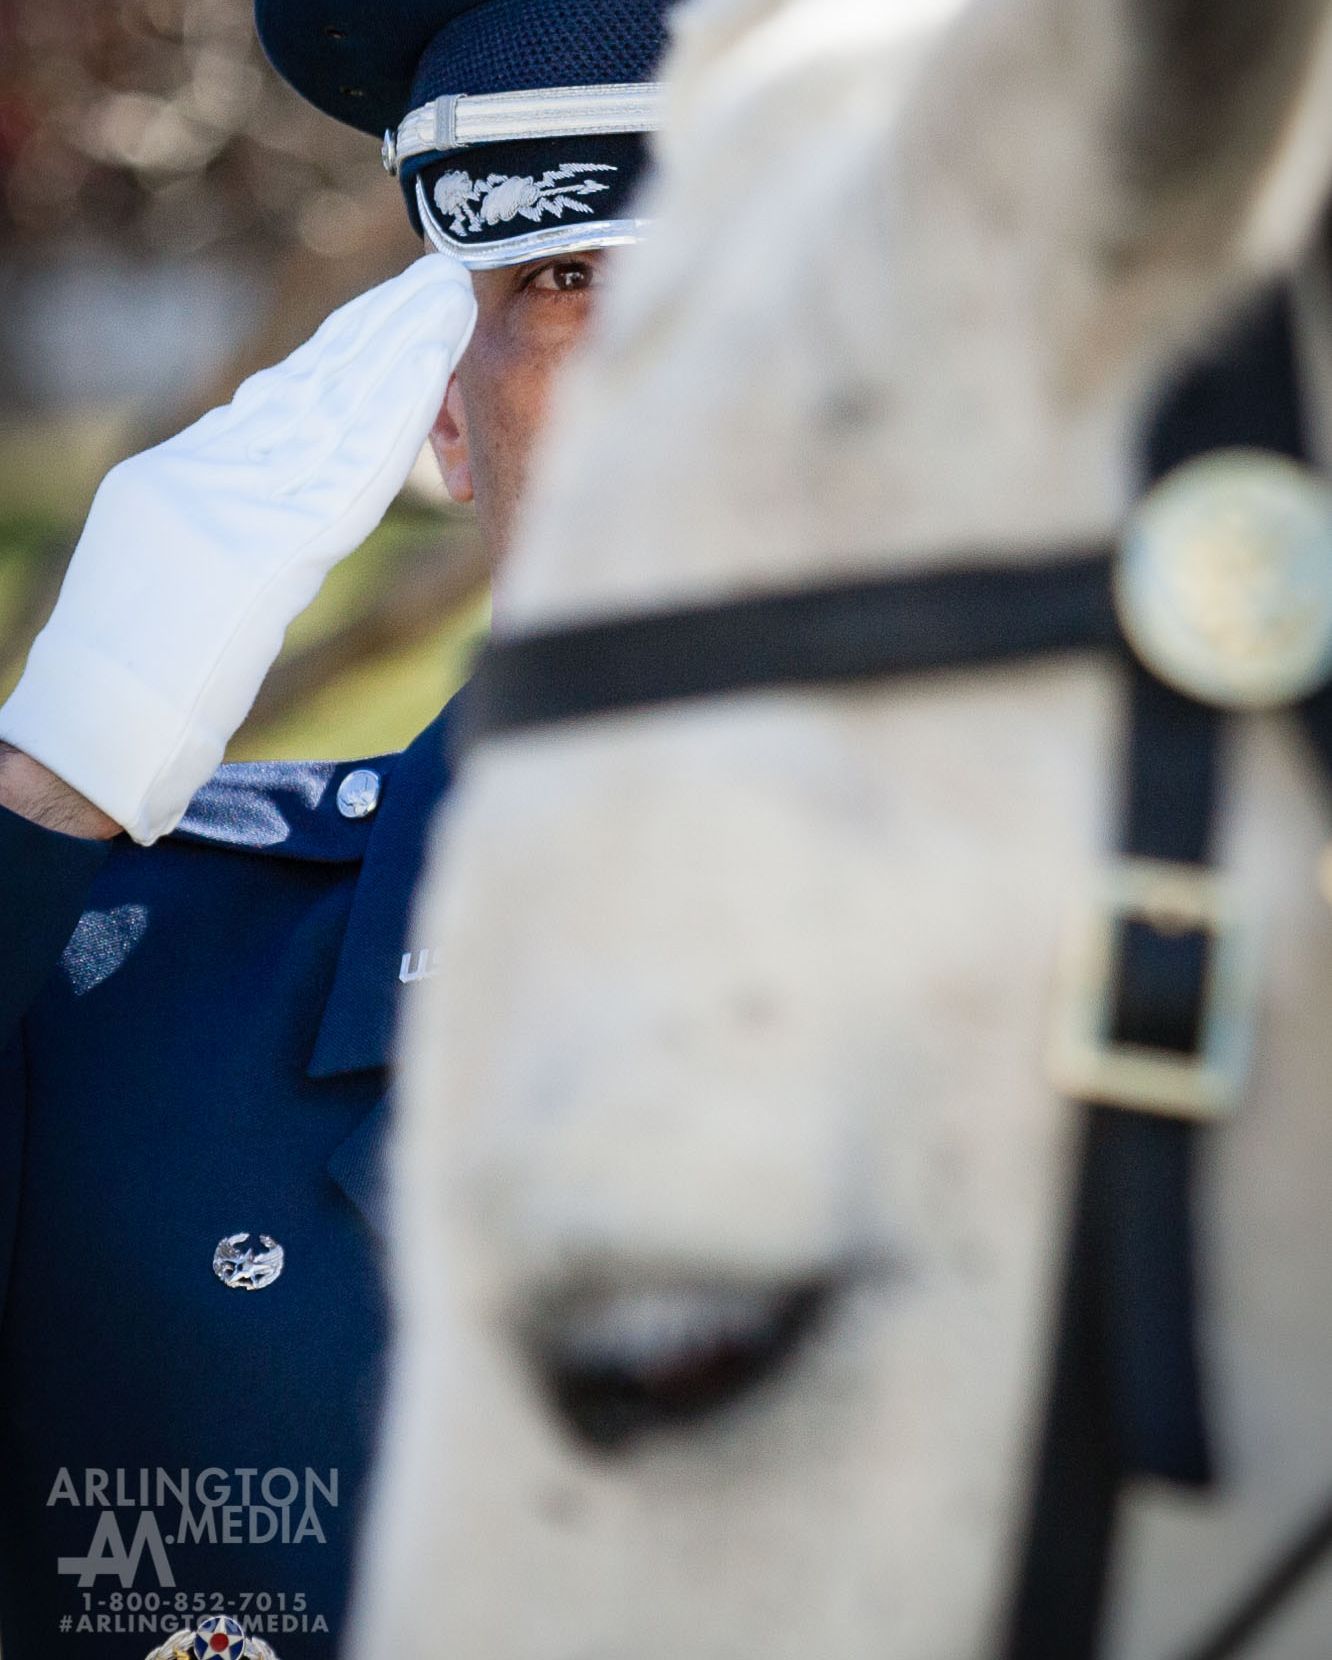 Only adding to the reverence of services at Arlington is the seamless way that soldiers, marines, sailors, and airmen work alongside four-legged members of the Caisson teams. 

A typical caisson team consists of at least 7 horses, 4 riders, and one serviceman holding the colors of the service the deceased served in, plus the caisson. Six of the horses are pulling the caisson, three of which have riders. The other three horses are riderless.

The Caisson platoon usually begins work at 4am and does not cease until the final services at Arlington have concluded for the day.  They support full honors services for all eligible branches and the integration of these horses into services is both nuanced and extremely moving.  This image captures the emotion of these moments in a very powerful way.  PC: @arlingtonmedia